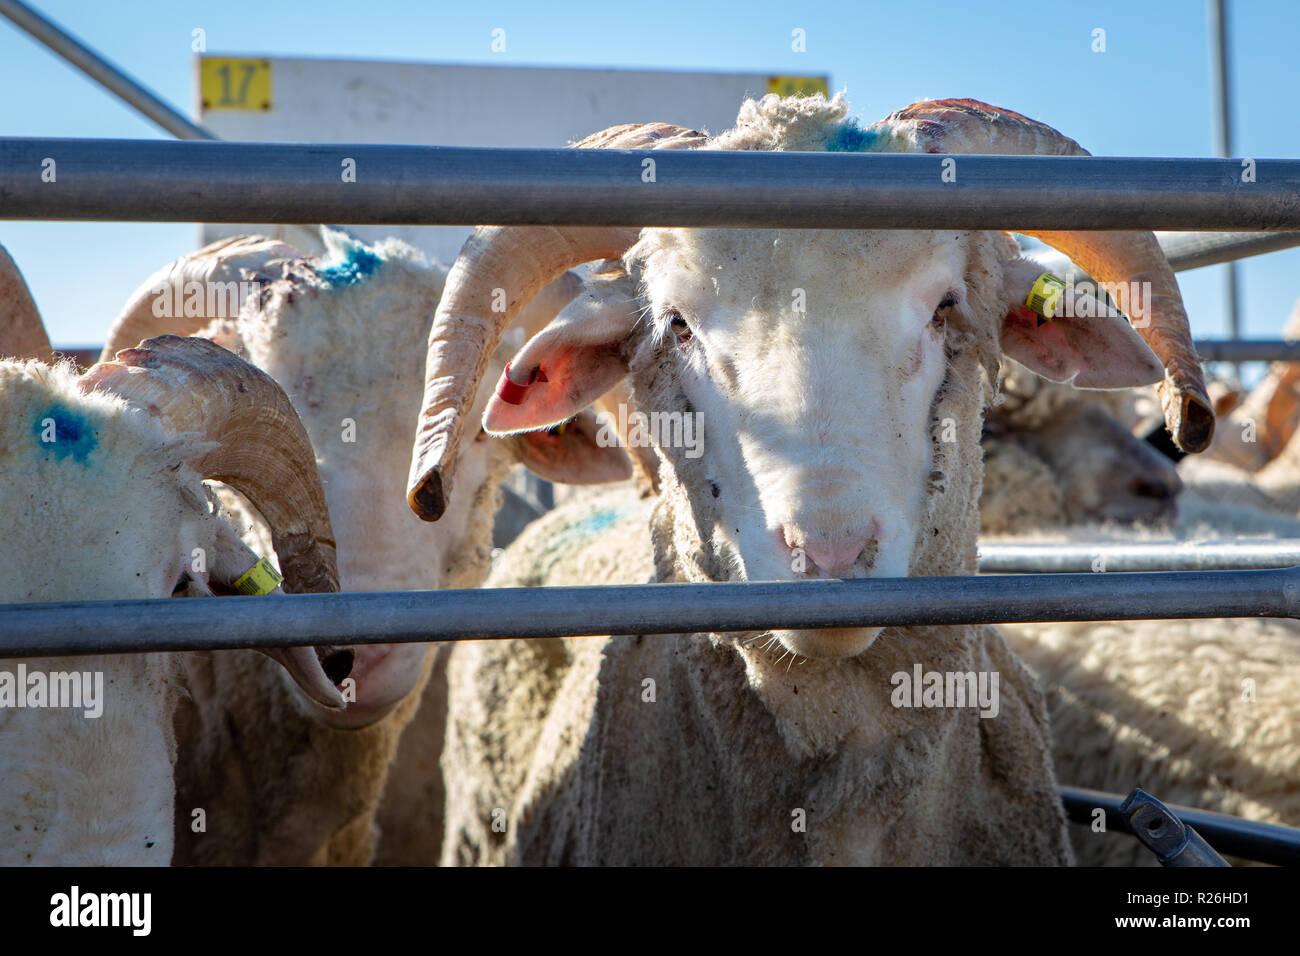 Young horned merino sheep waiting in pens to be auctioned at the sheep sale in Coalgate, New Zealand Stock Photo